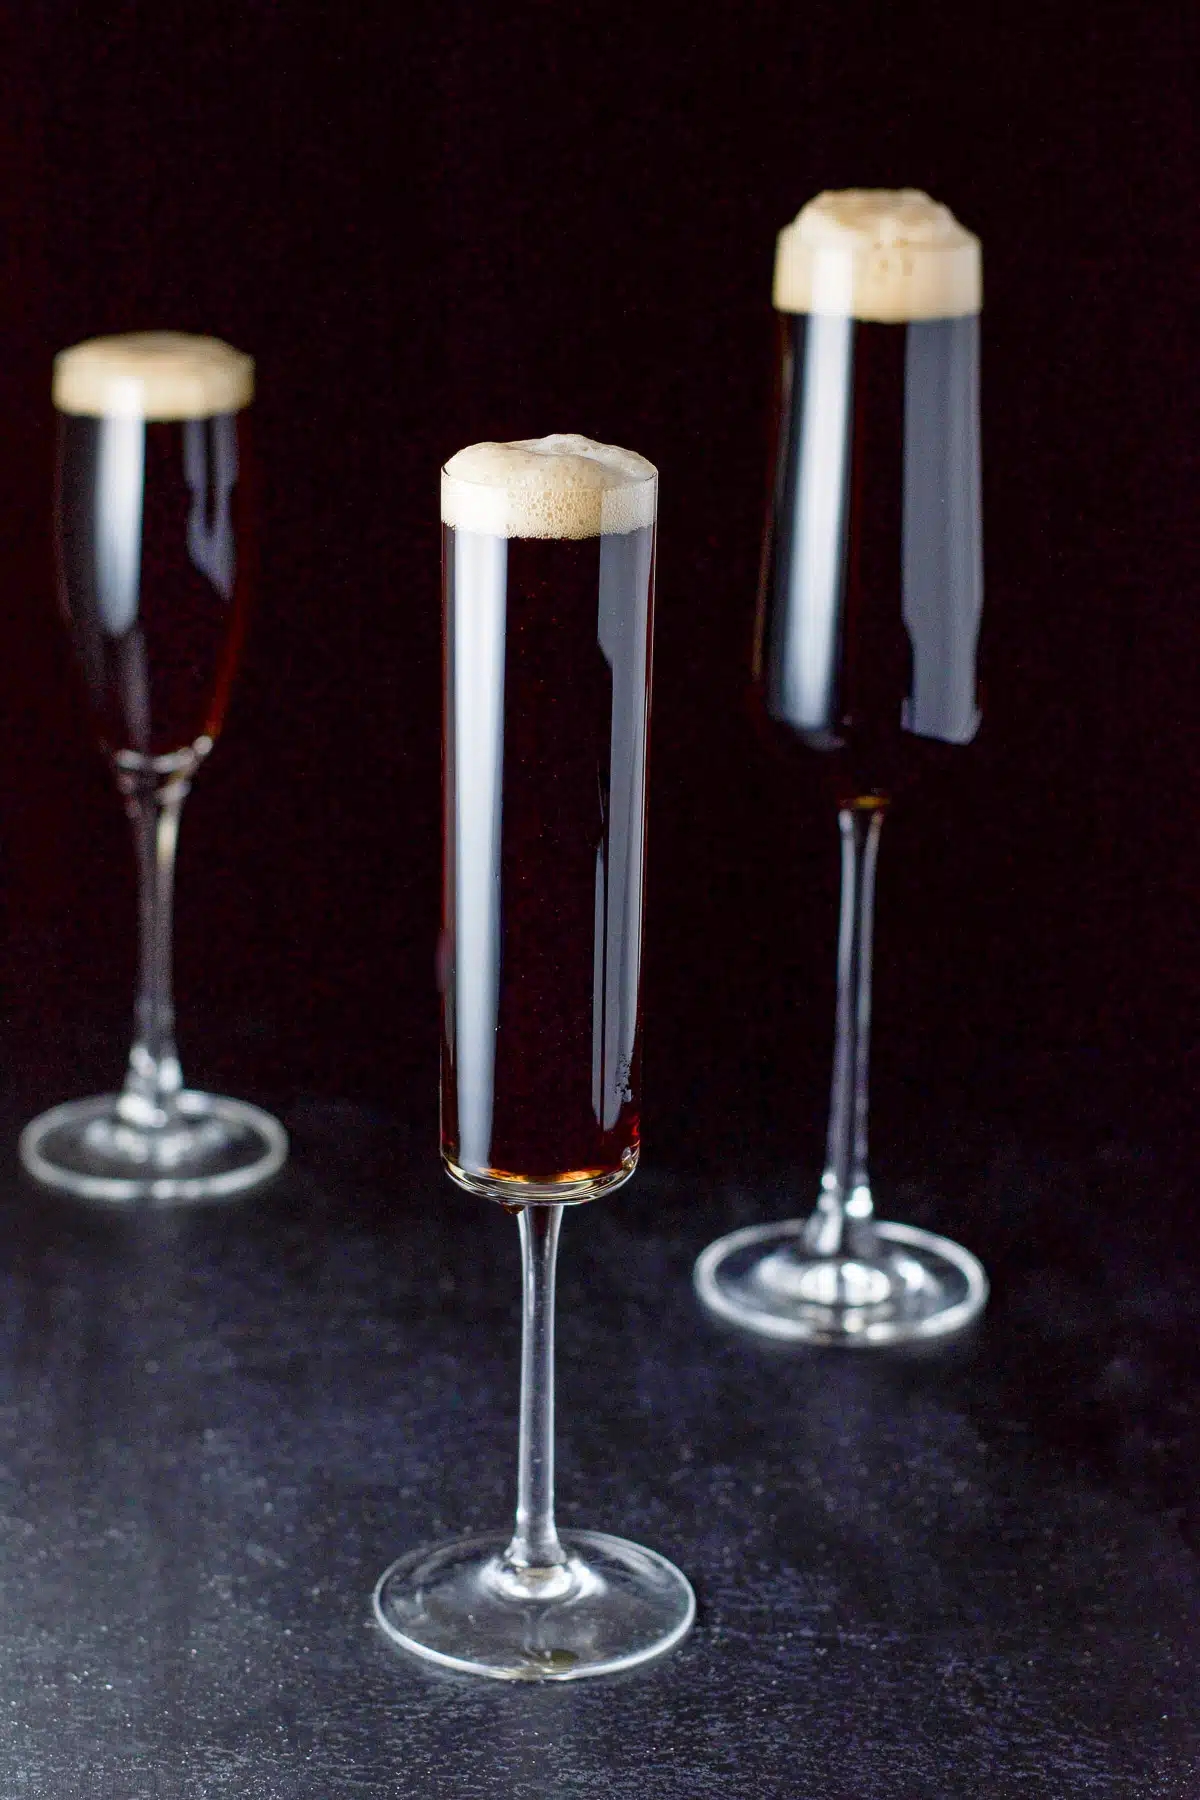 Three champagne glasses of the guinness cocktail